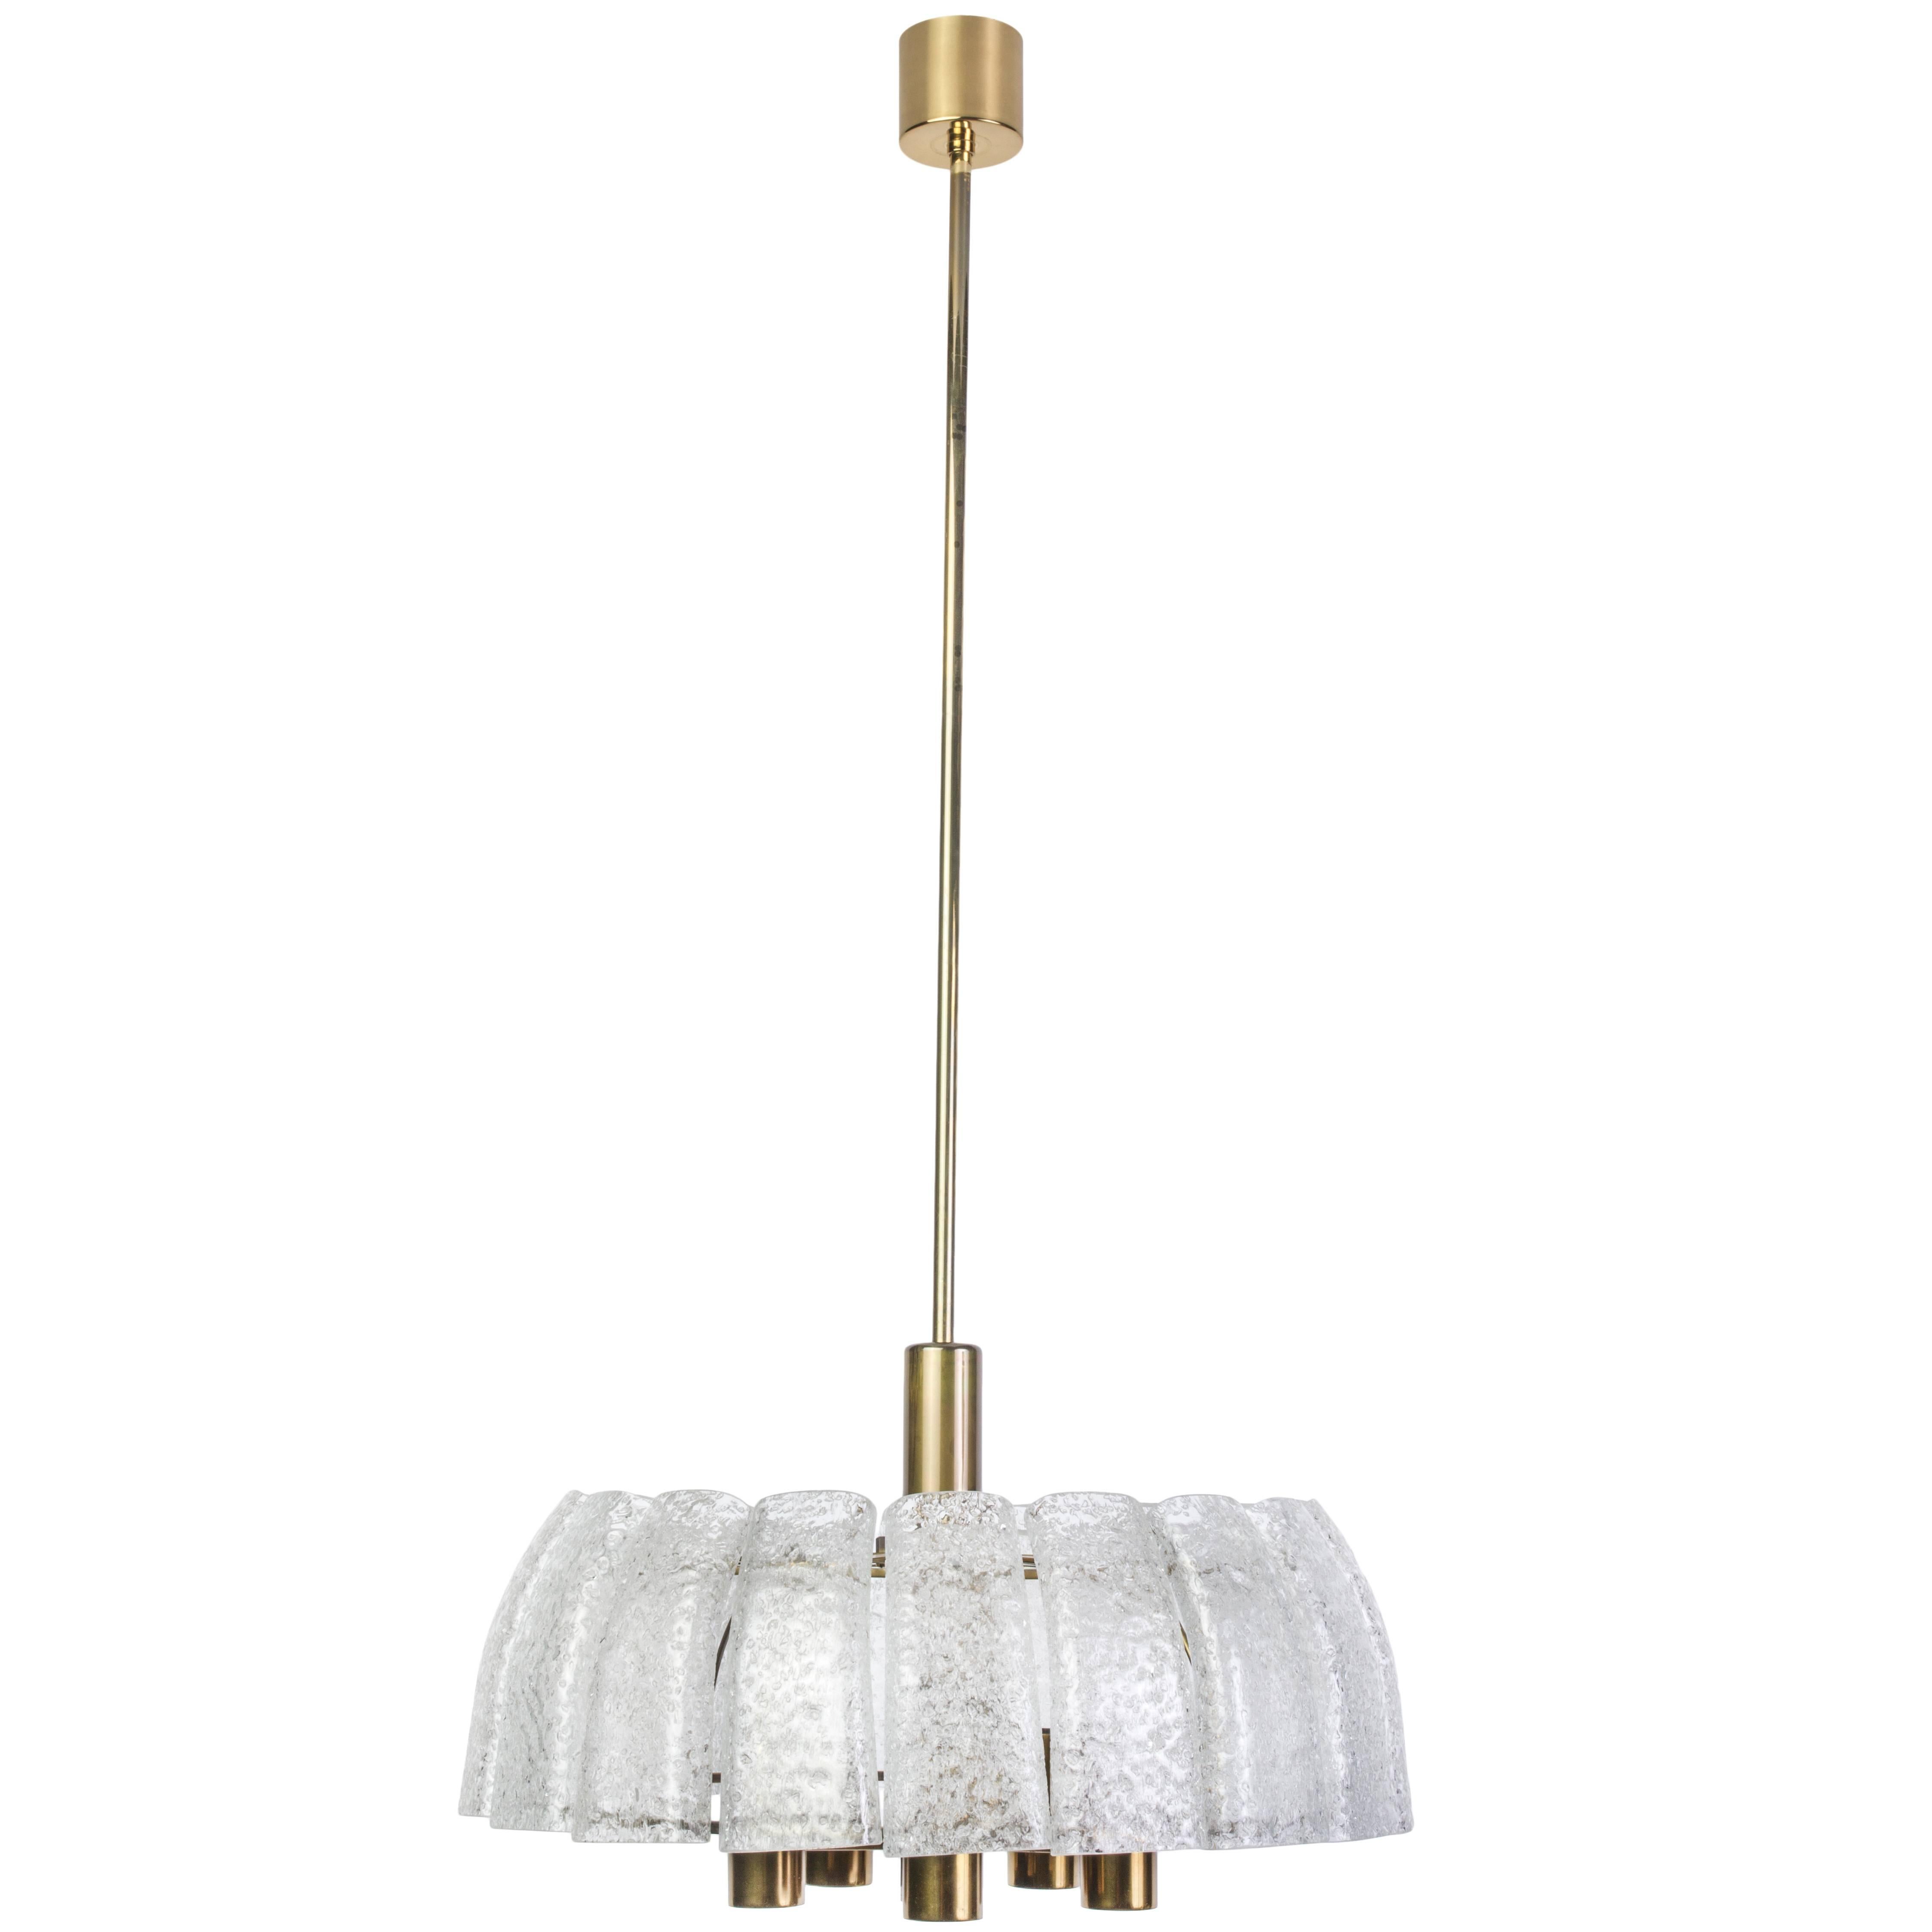 Exceptional 1950s Mid-Century Modernist Chandelier by Doria For Sale